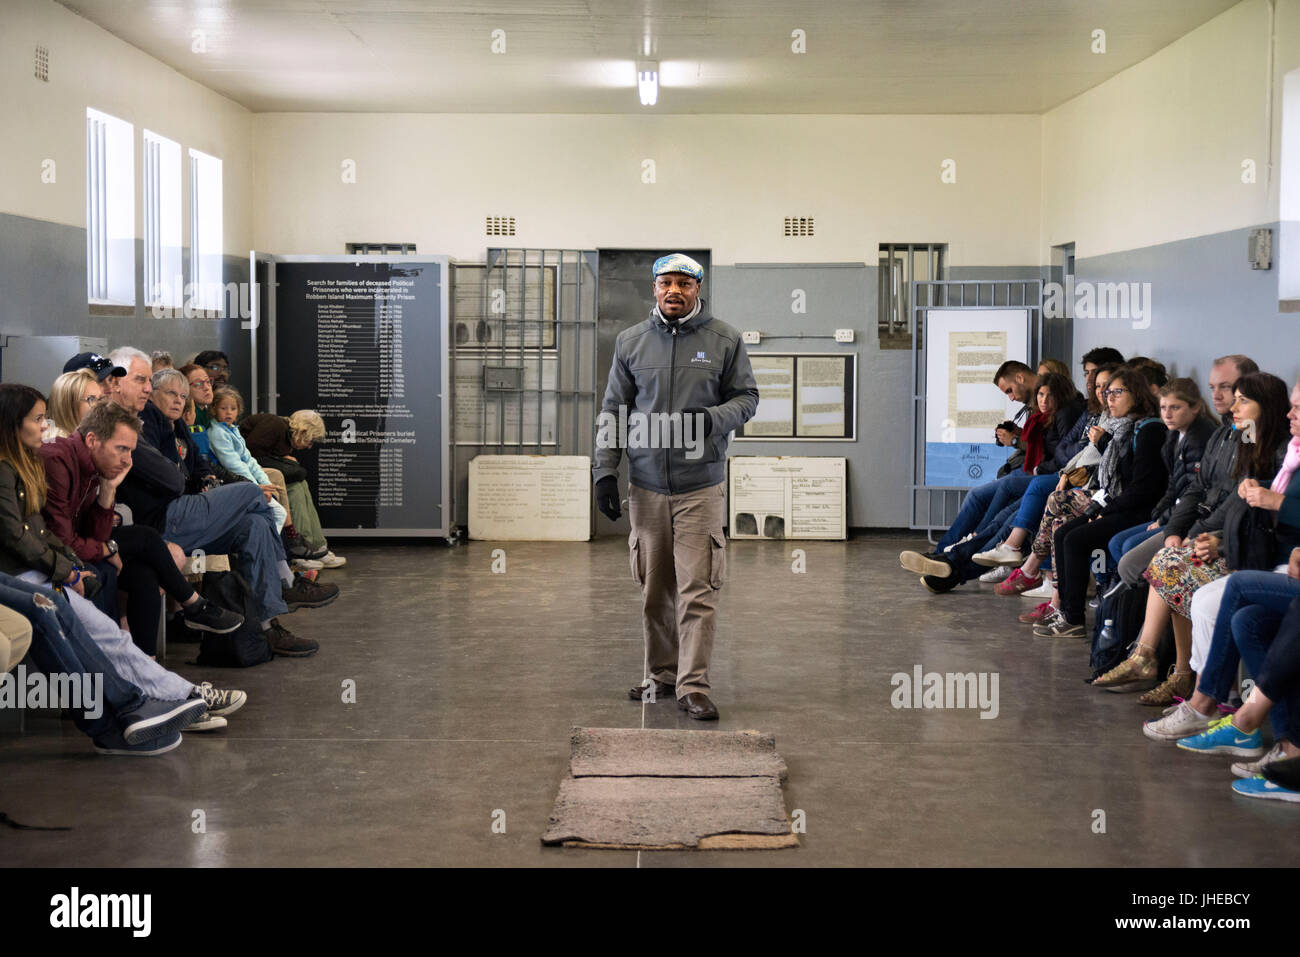 Tourists and prisioner in prisoners cell on Robben Island, Robben Island, prison grounds for political prisoners during apartheid in South Africa. Stock Photo